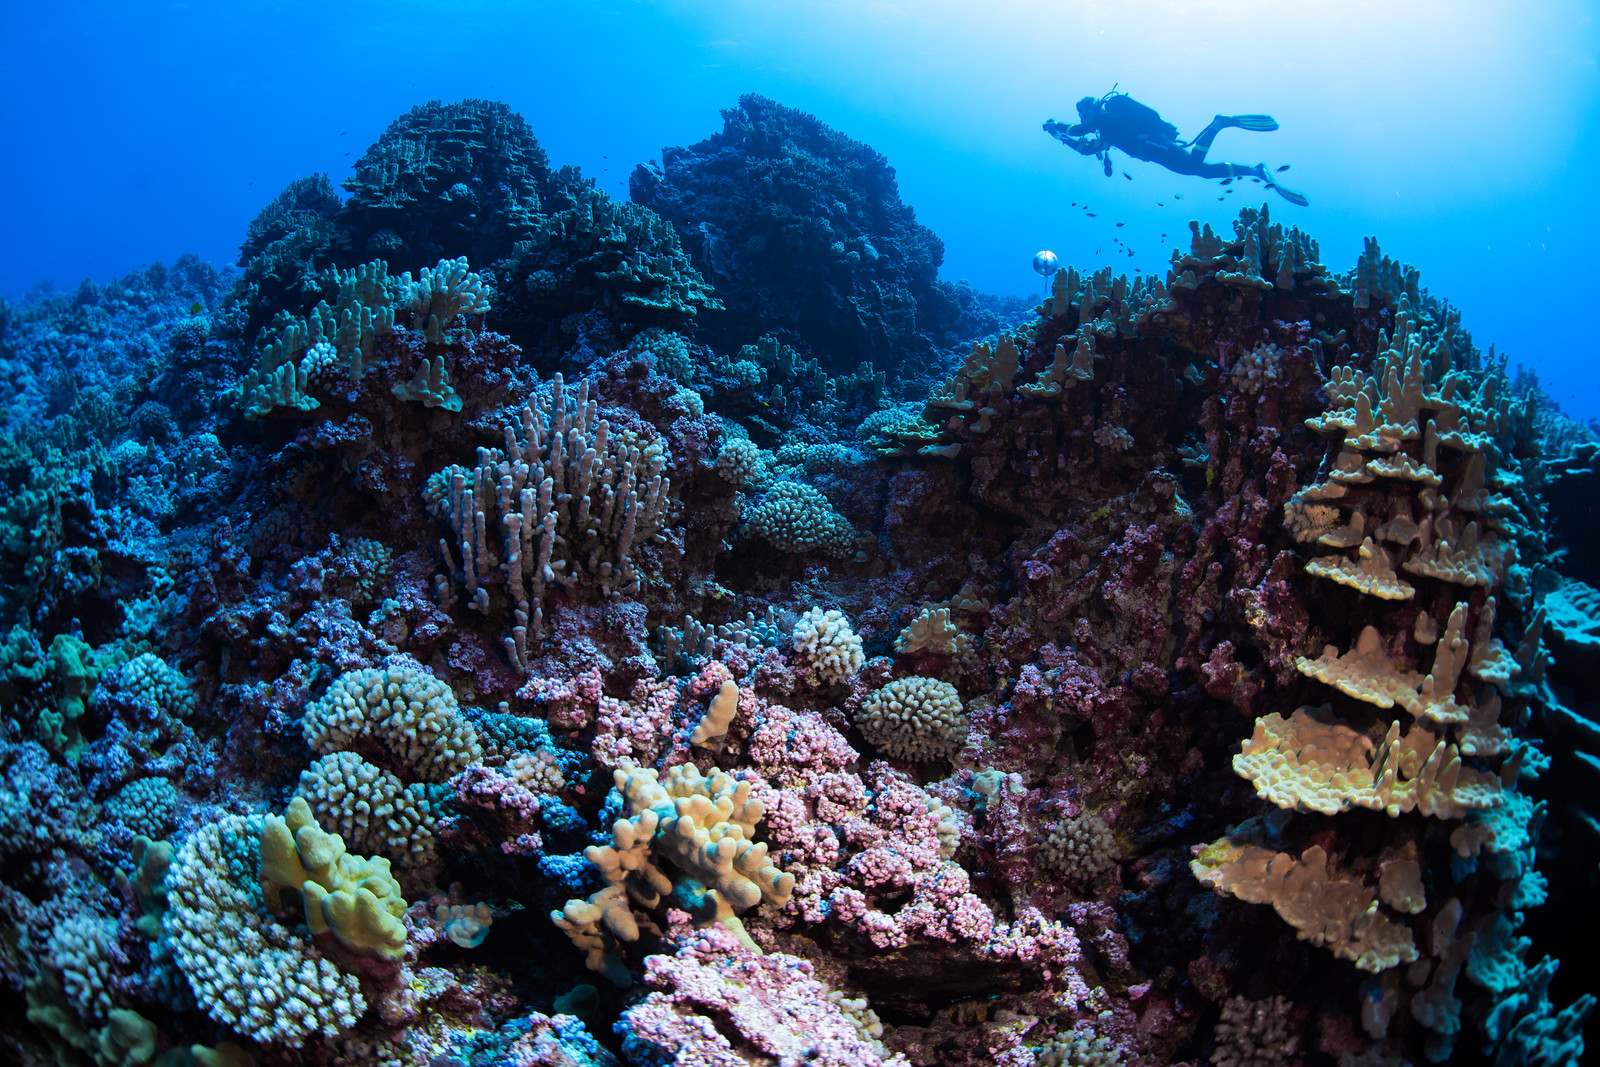 Pitcairn coral reefs, with diver in the background